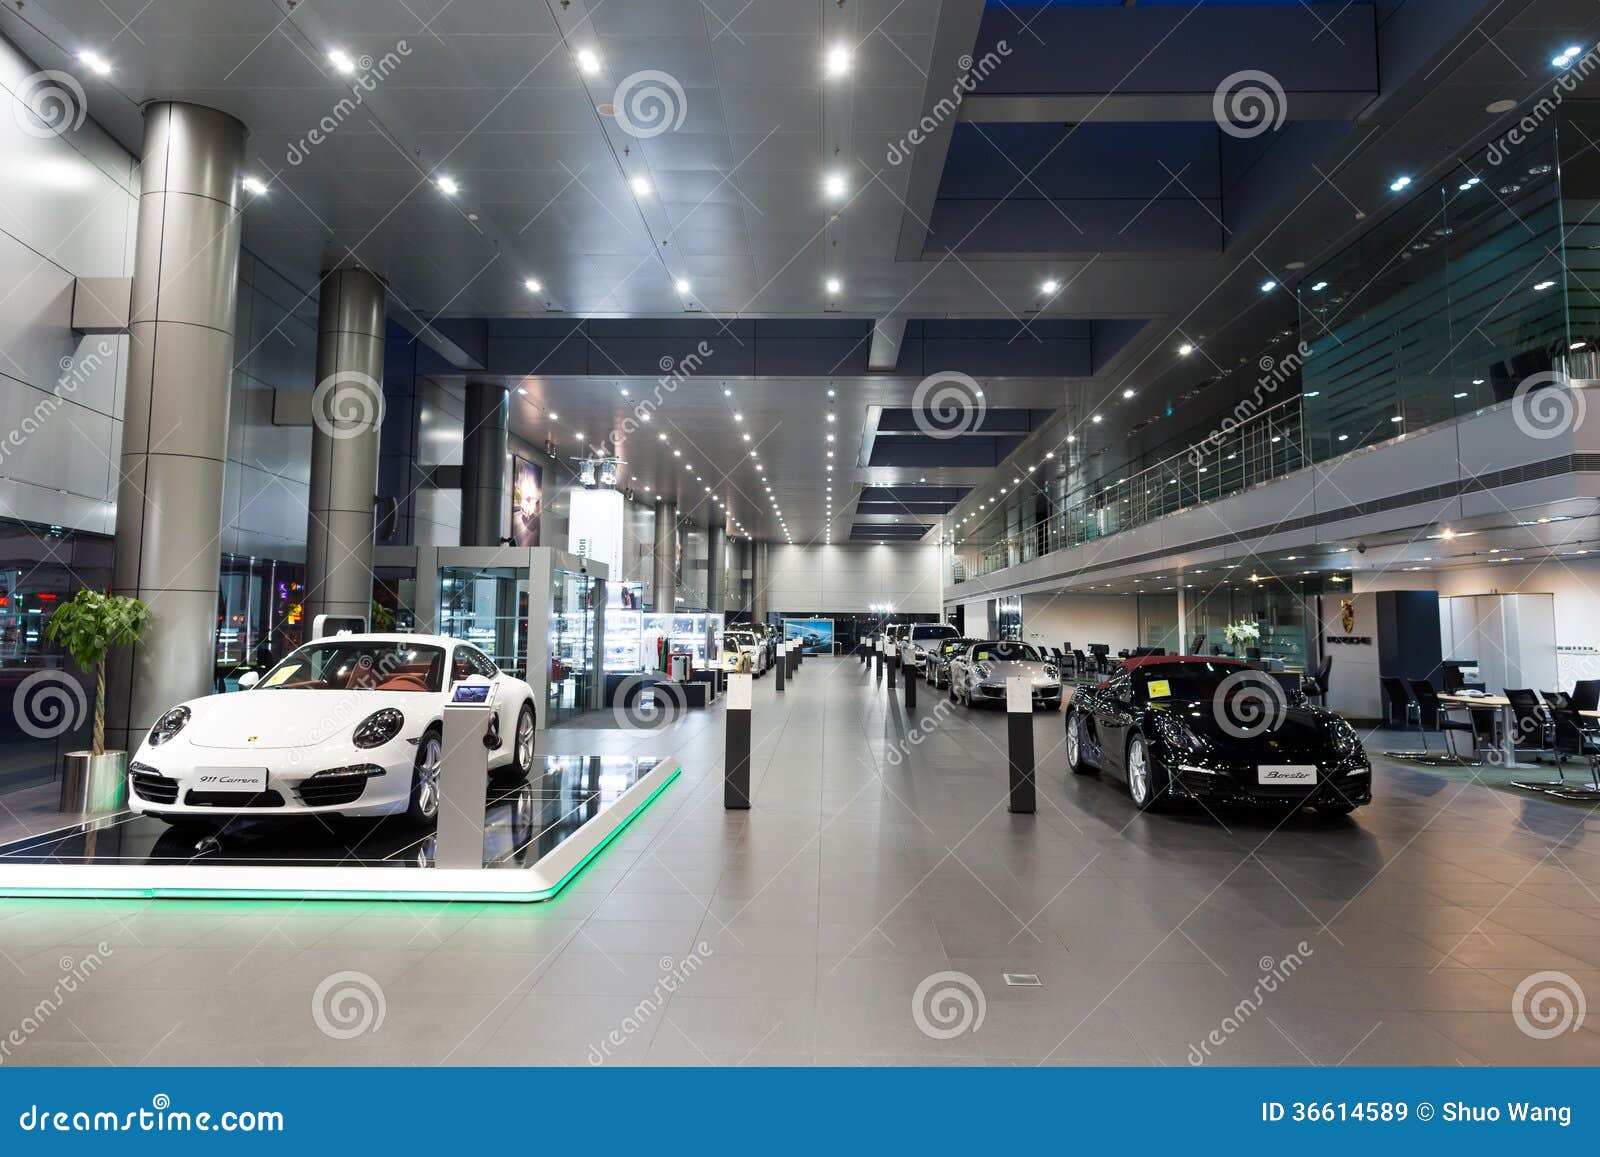 cafe Ochtend Gewoon Porsche Cars for Sale in Showroom Editorial Stock Image - Image of  investment, clean: 36614589